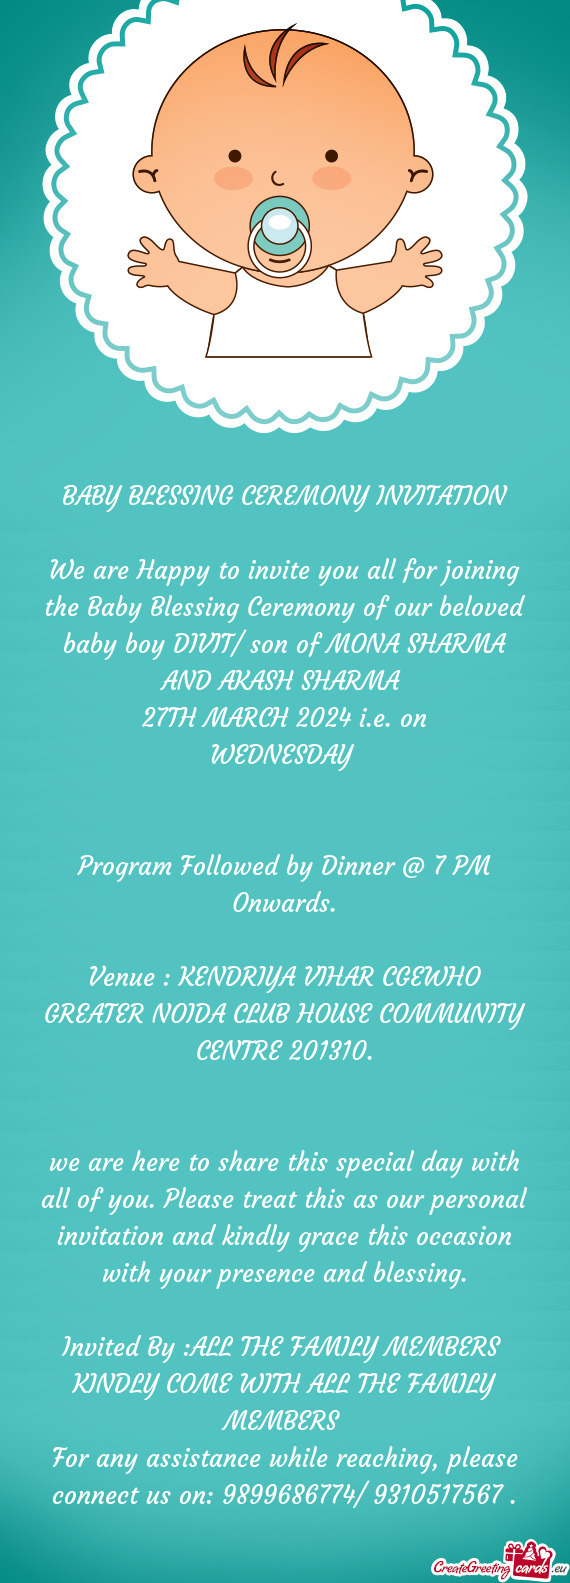 We are Happy to invite you all for joining the Baby Blessing Ceremony of our beloved baby boy DIVIT/